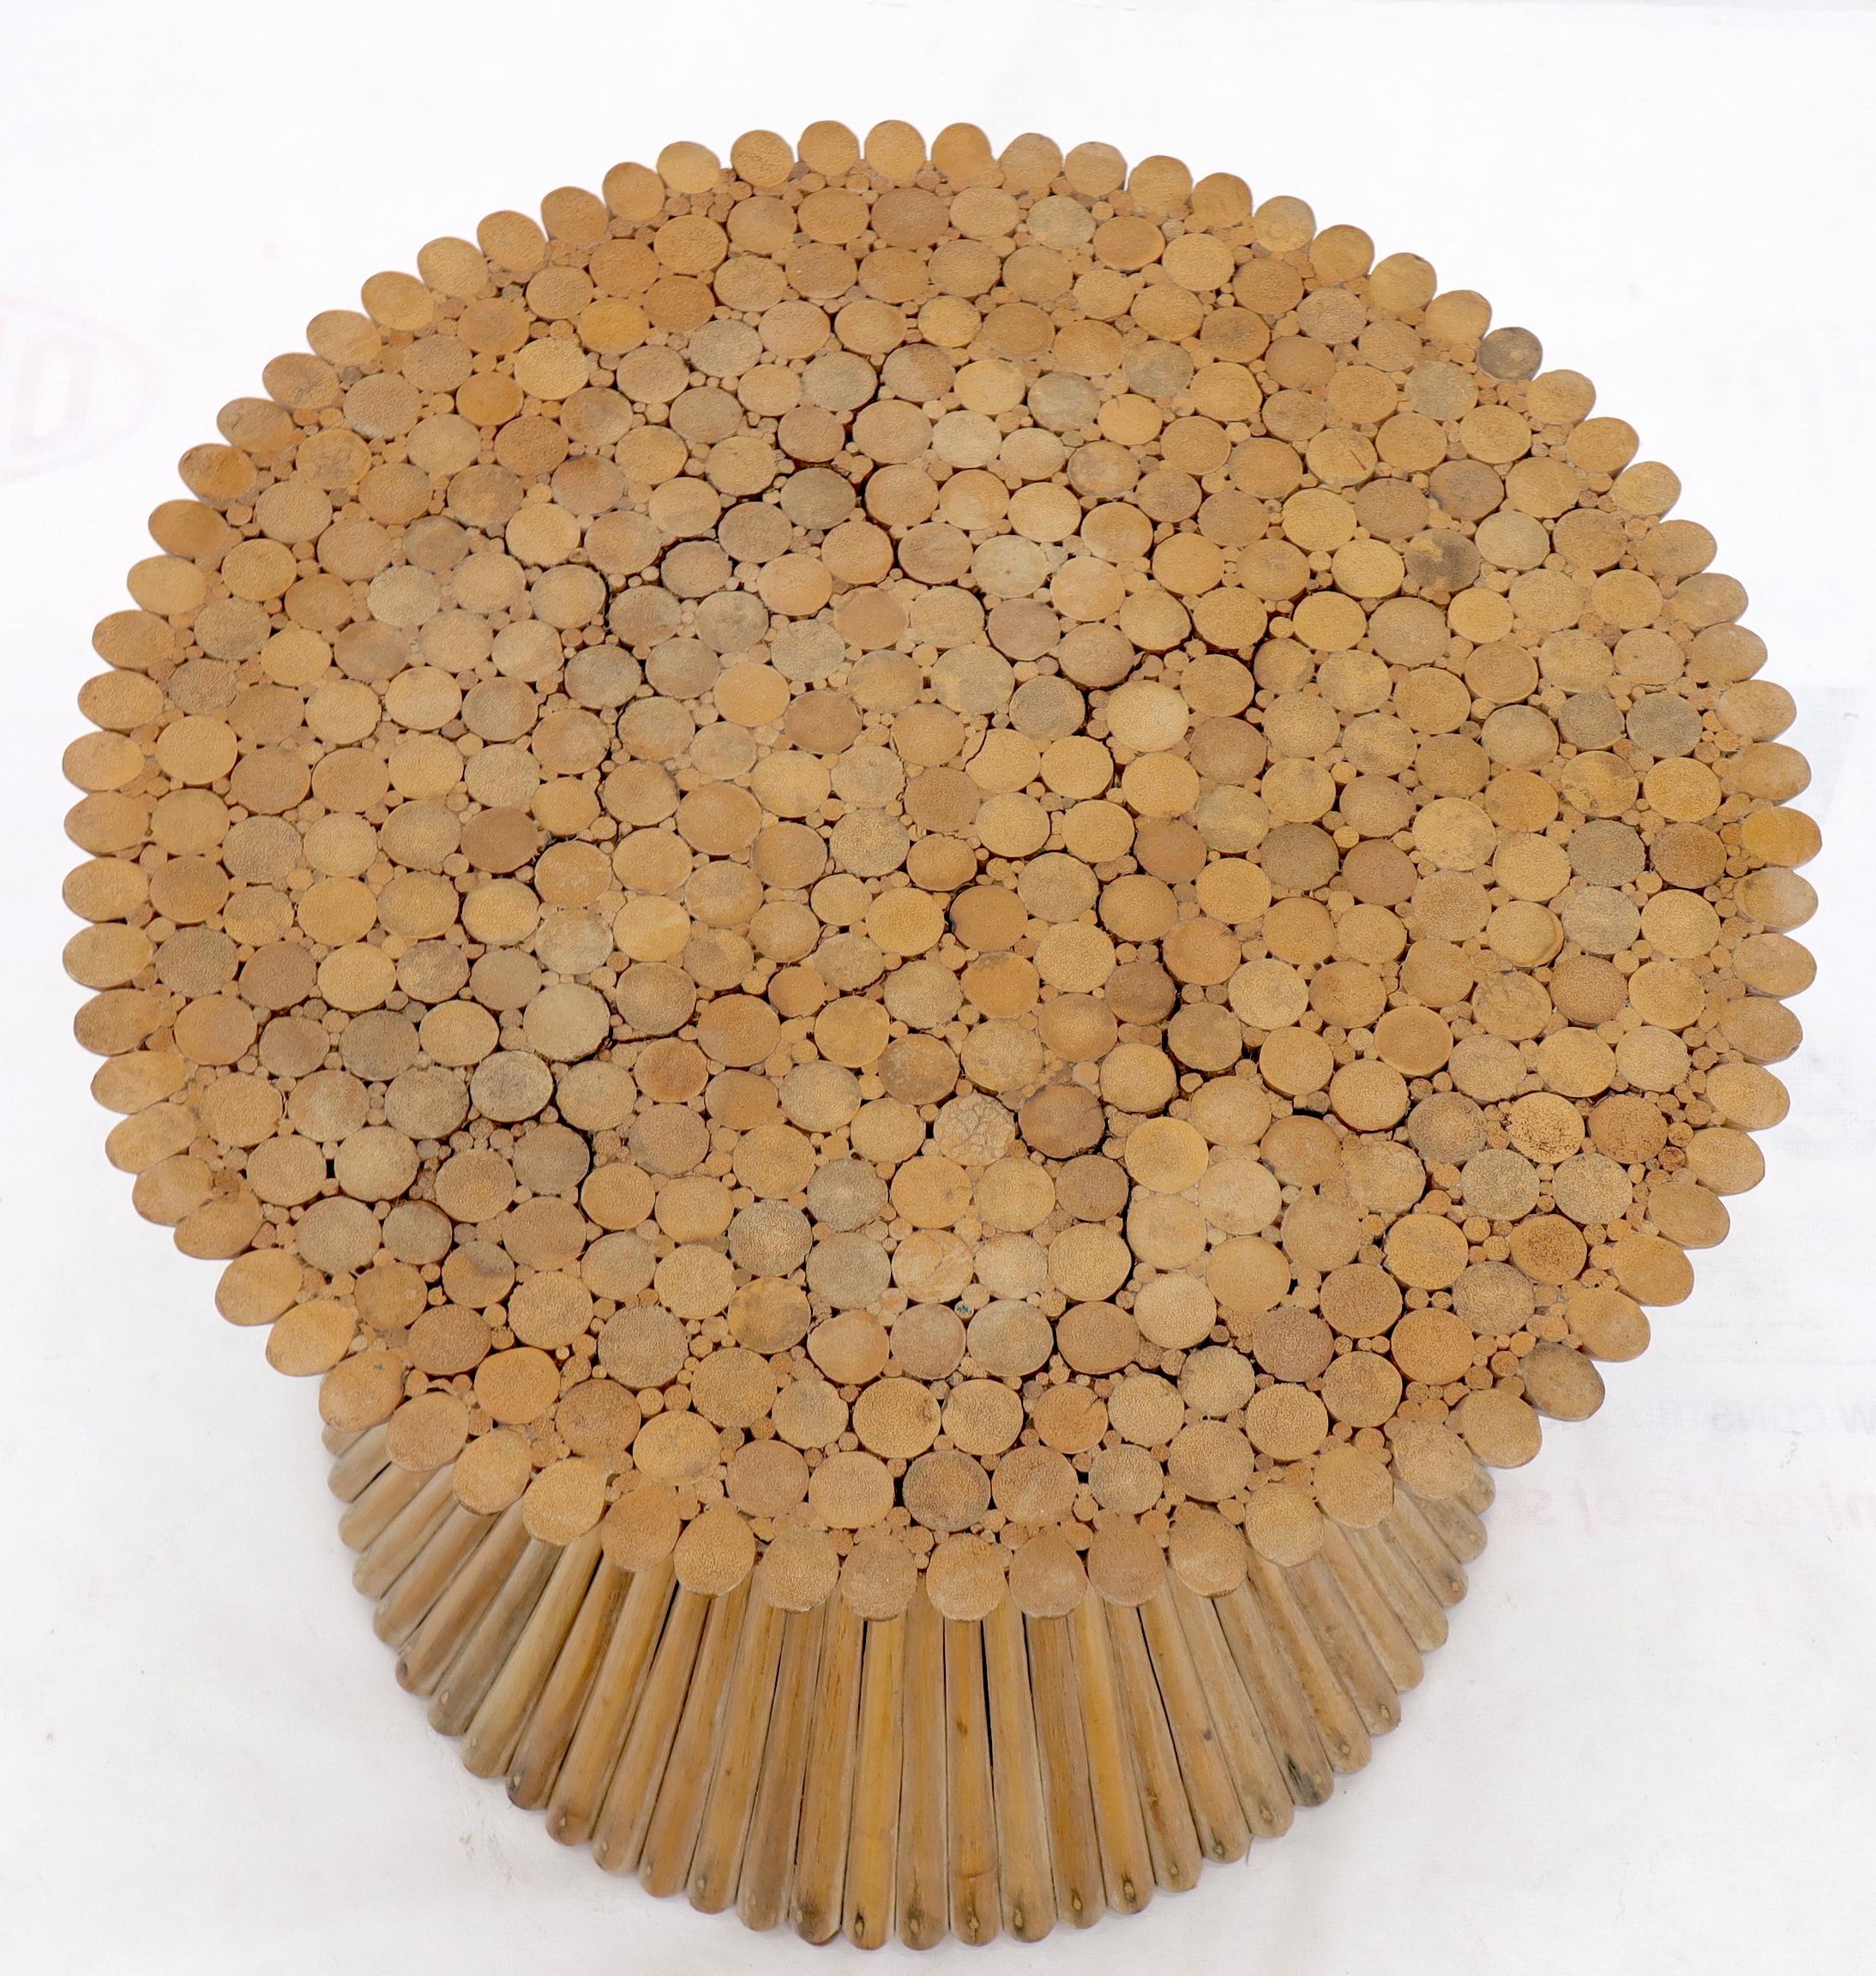 American Wheat Sheaf Bamboo Mid-Century Modern Round Side Table Stand